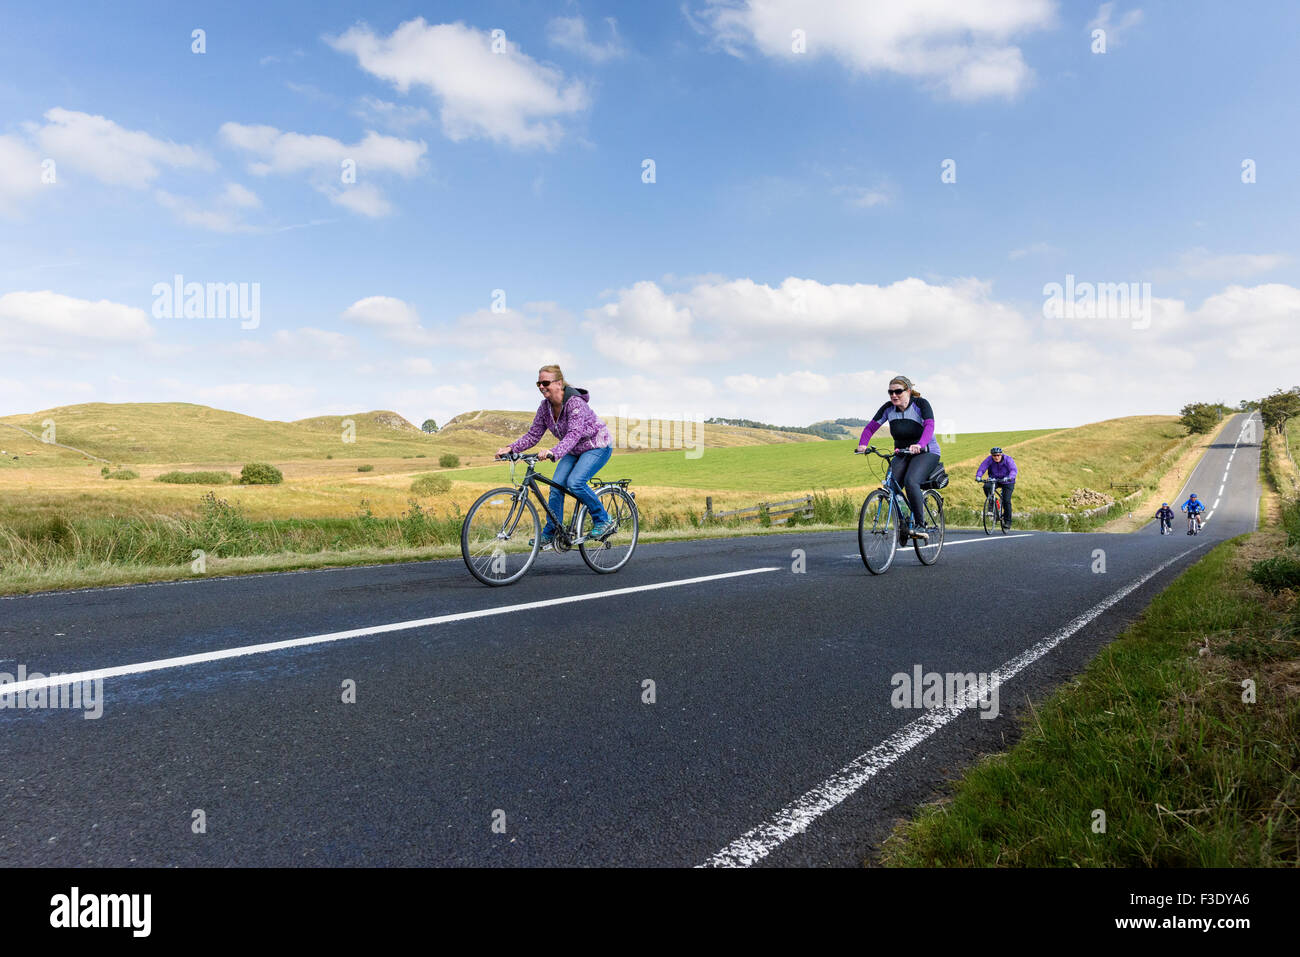 Older cyclists Stock Photo